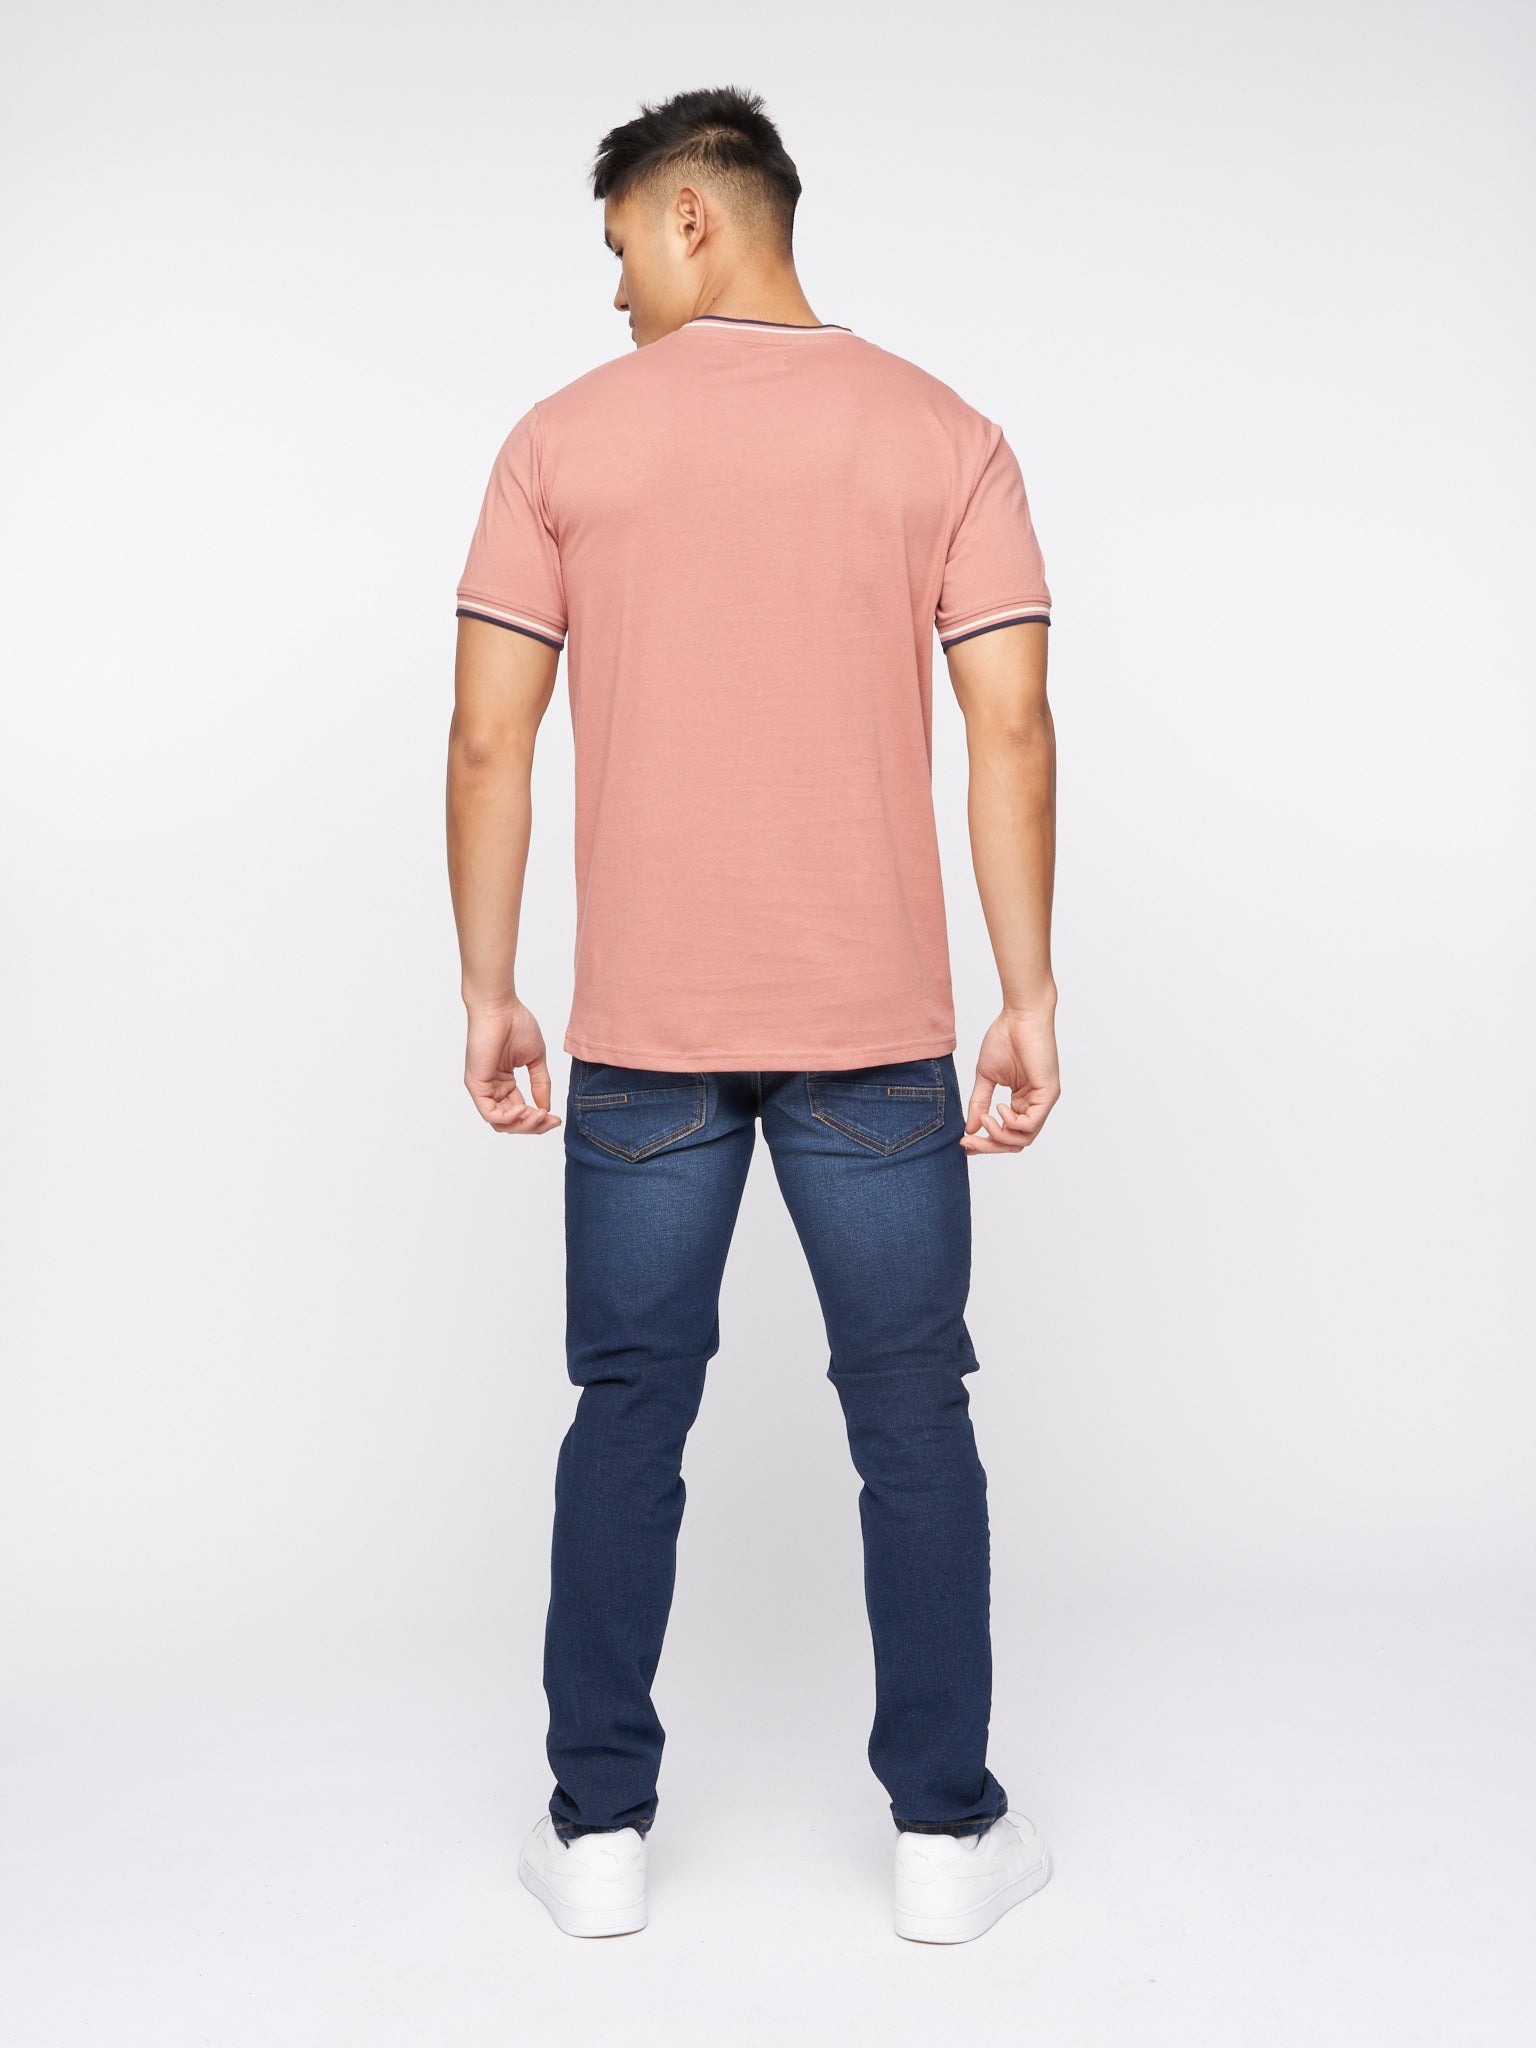 Ordale T-Shirt Brick Red